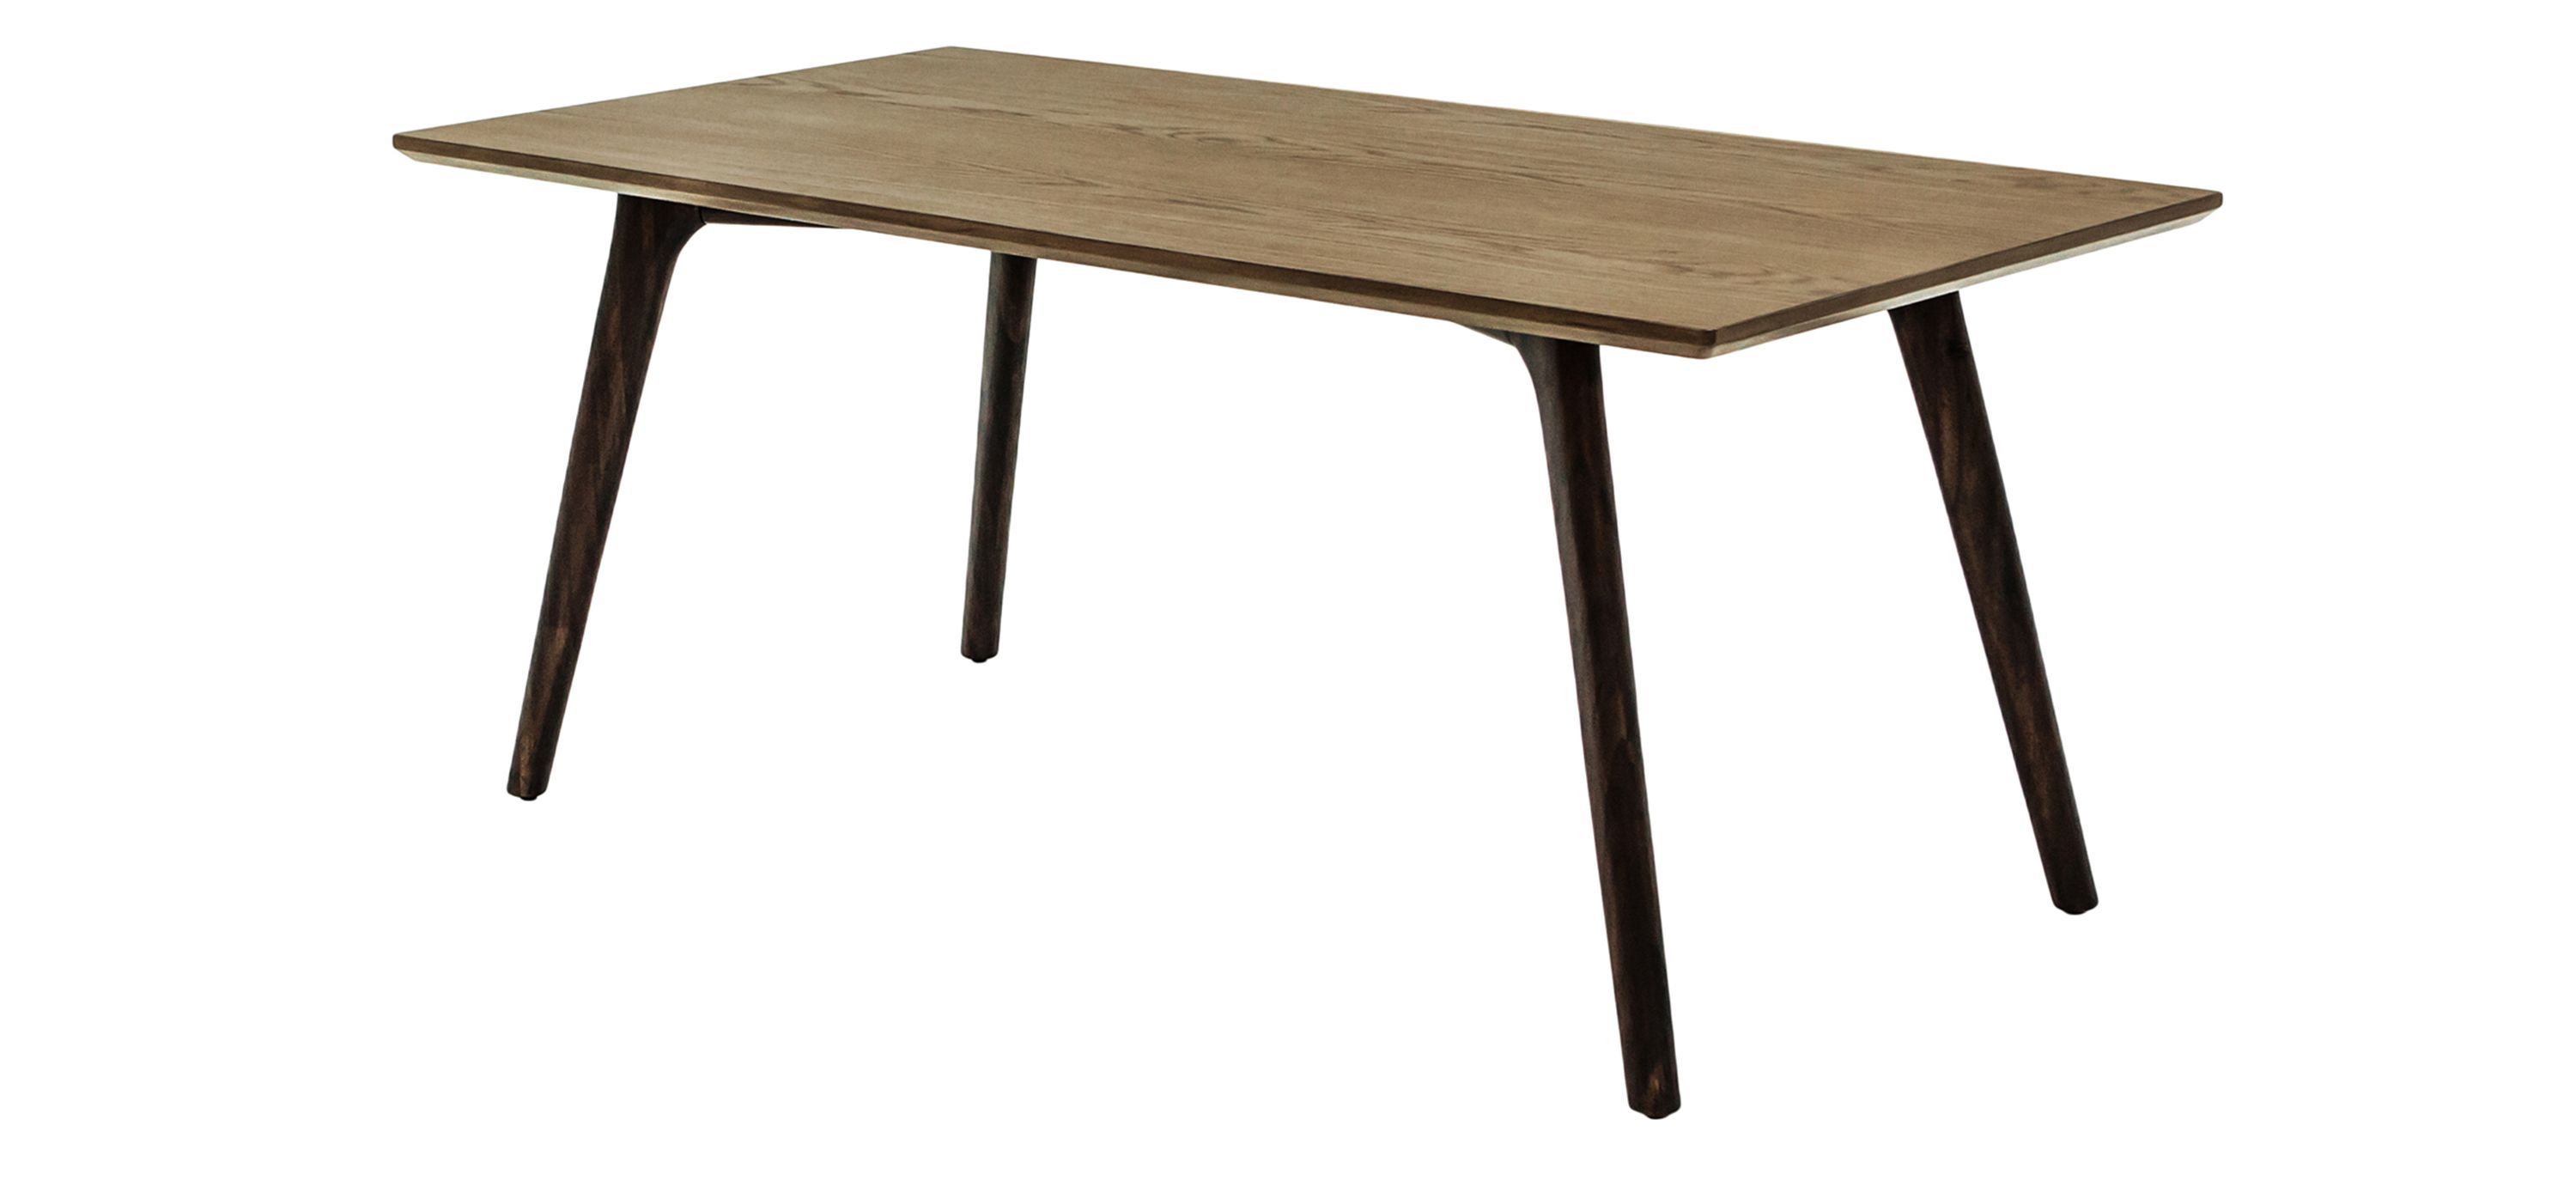 Medley Square Dining Table